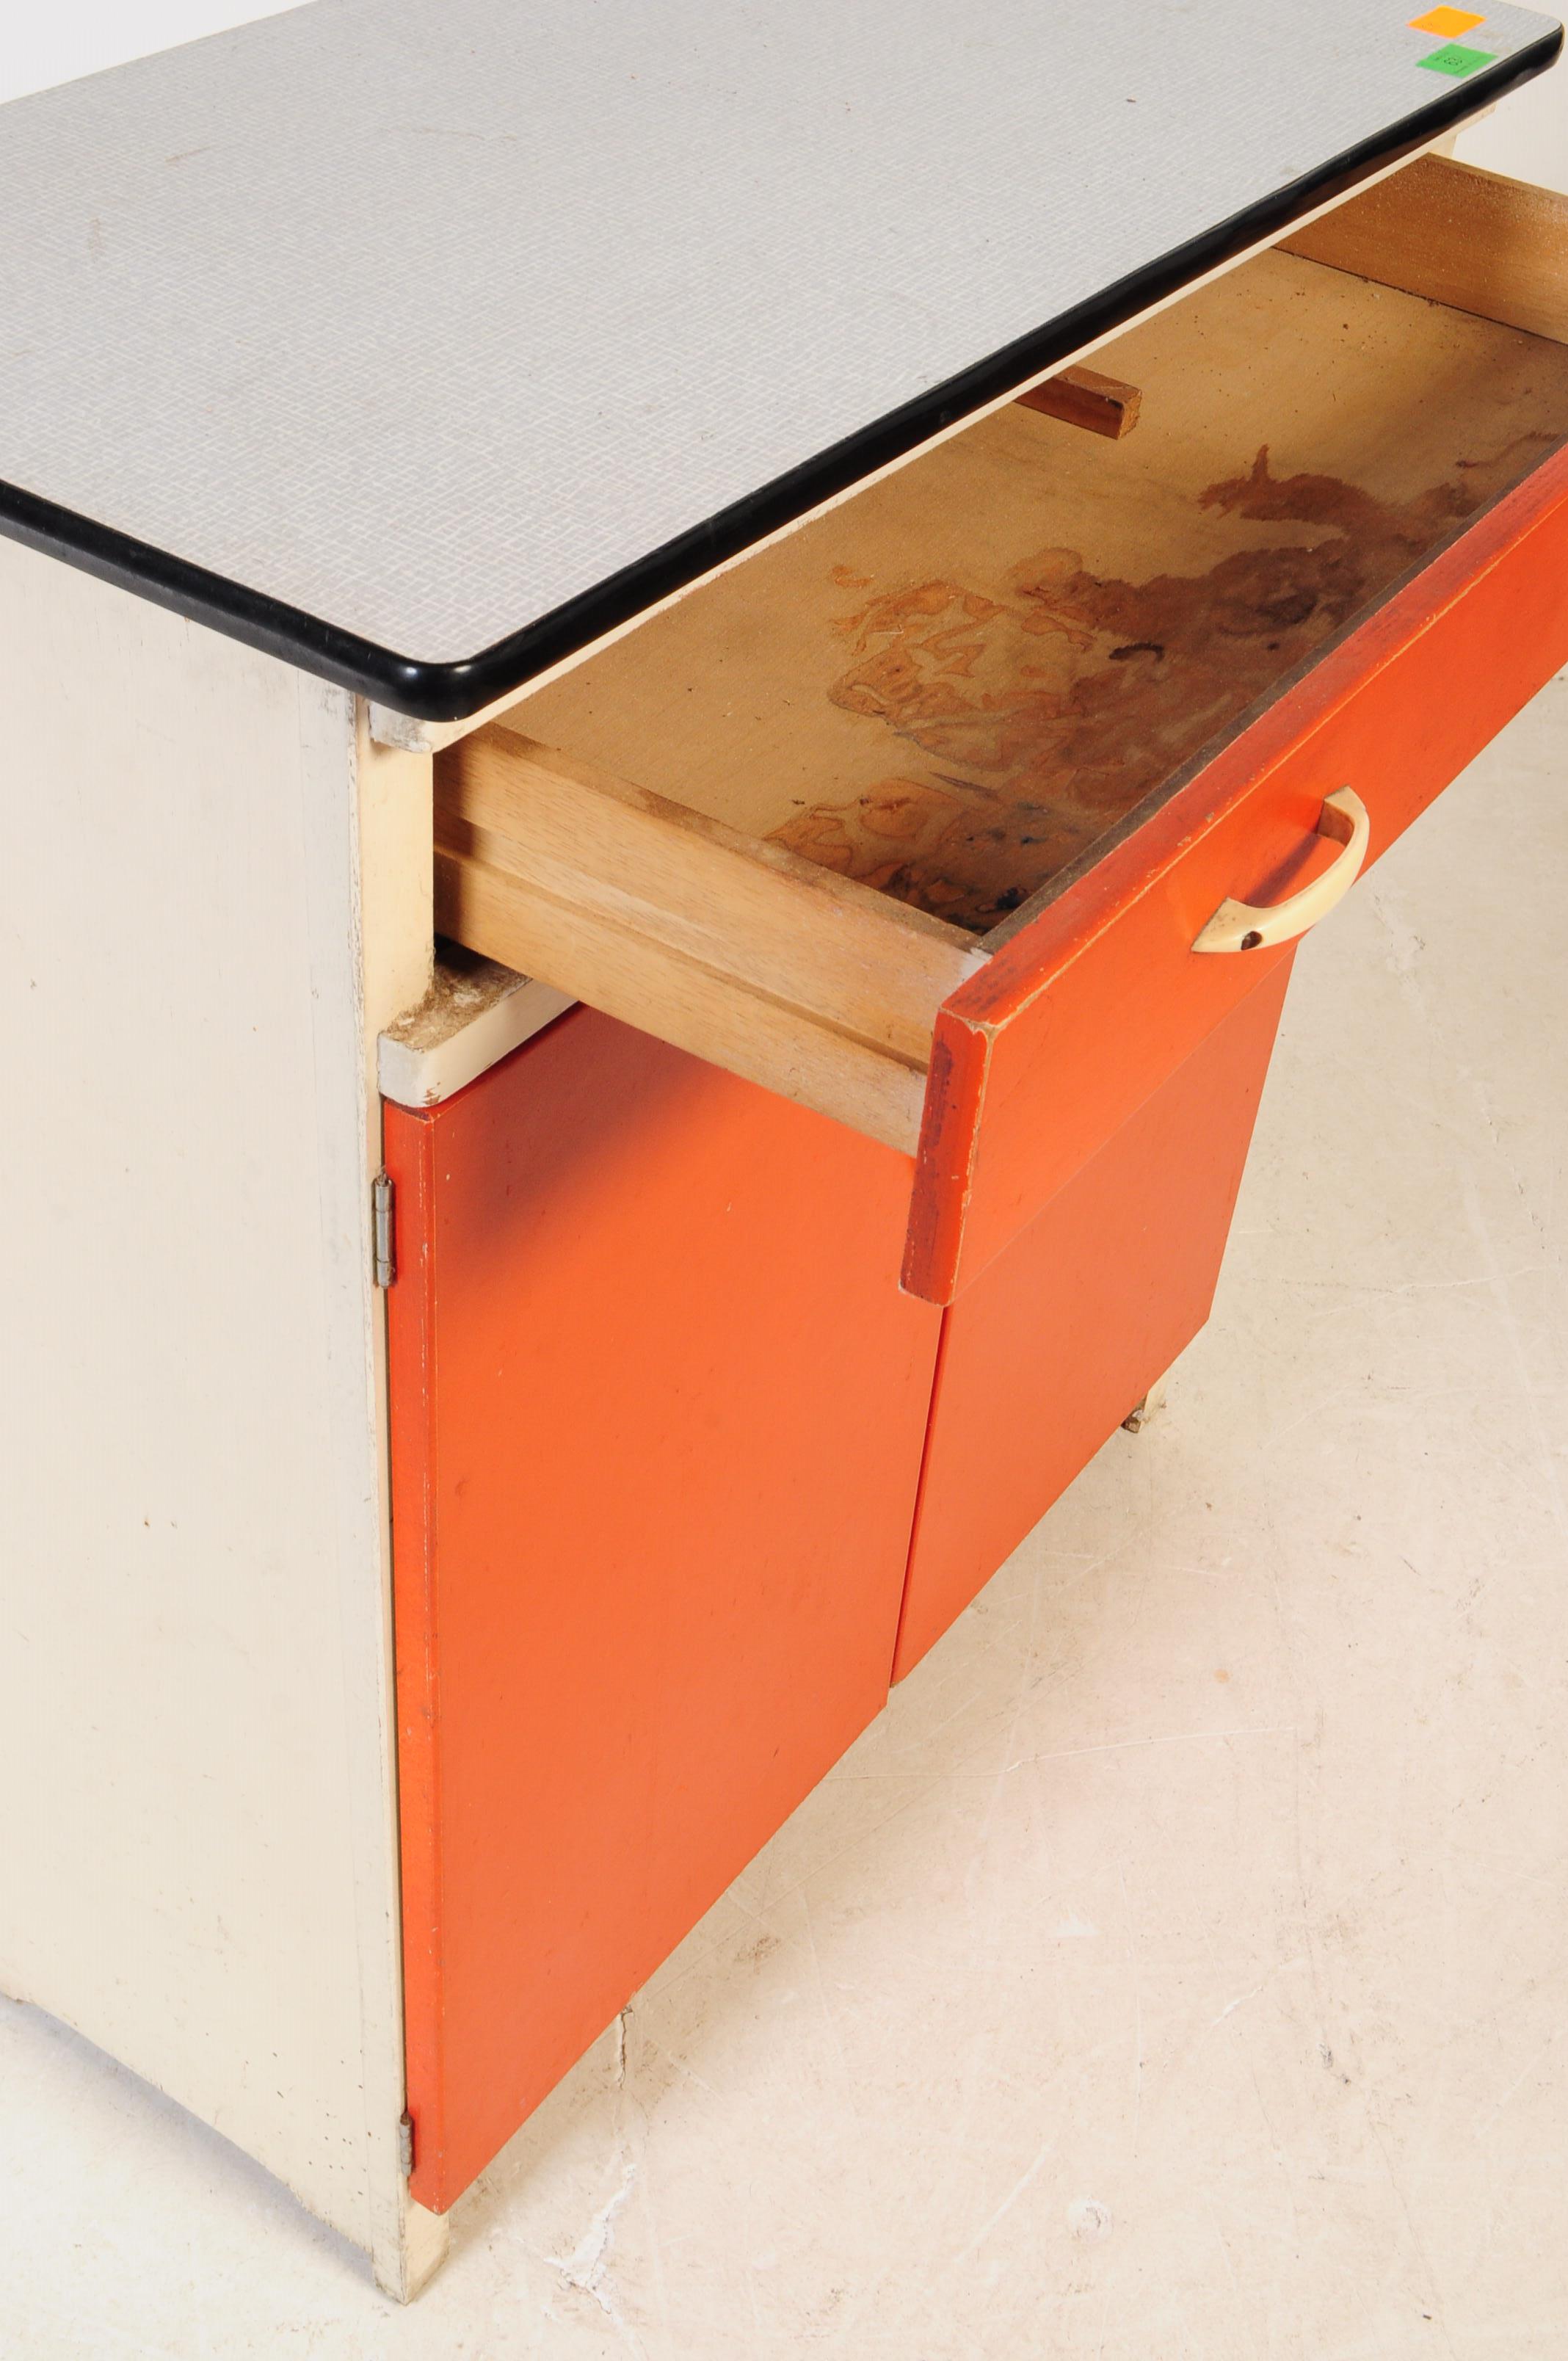 MID 20TH CENTURY FORMICA KITCHEN UNIT - Image 3 of 7